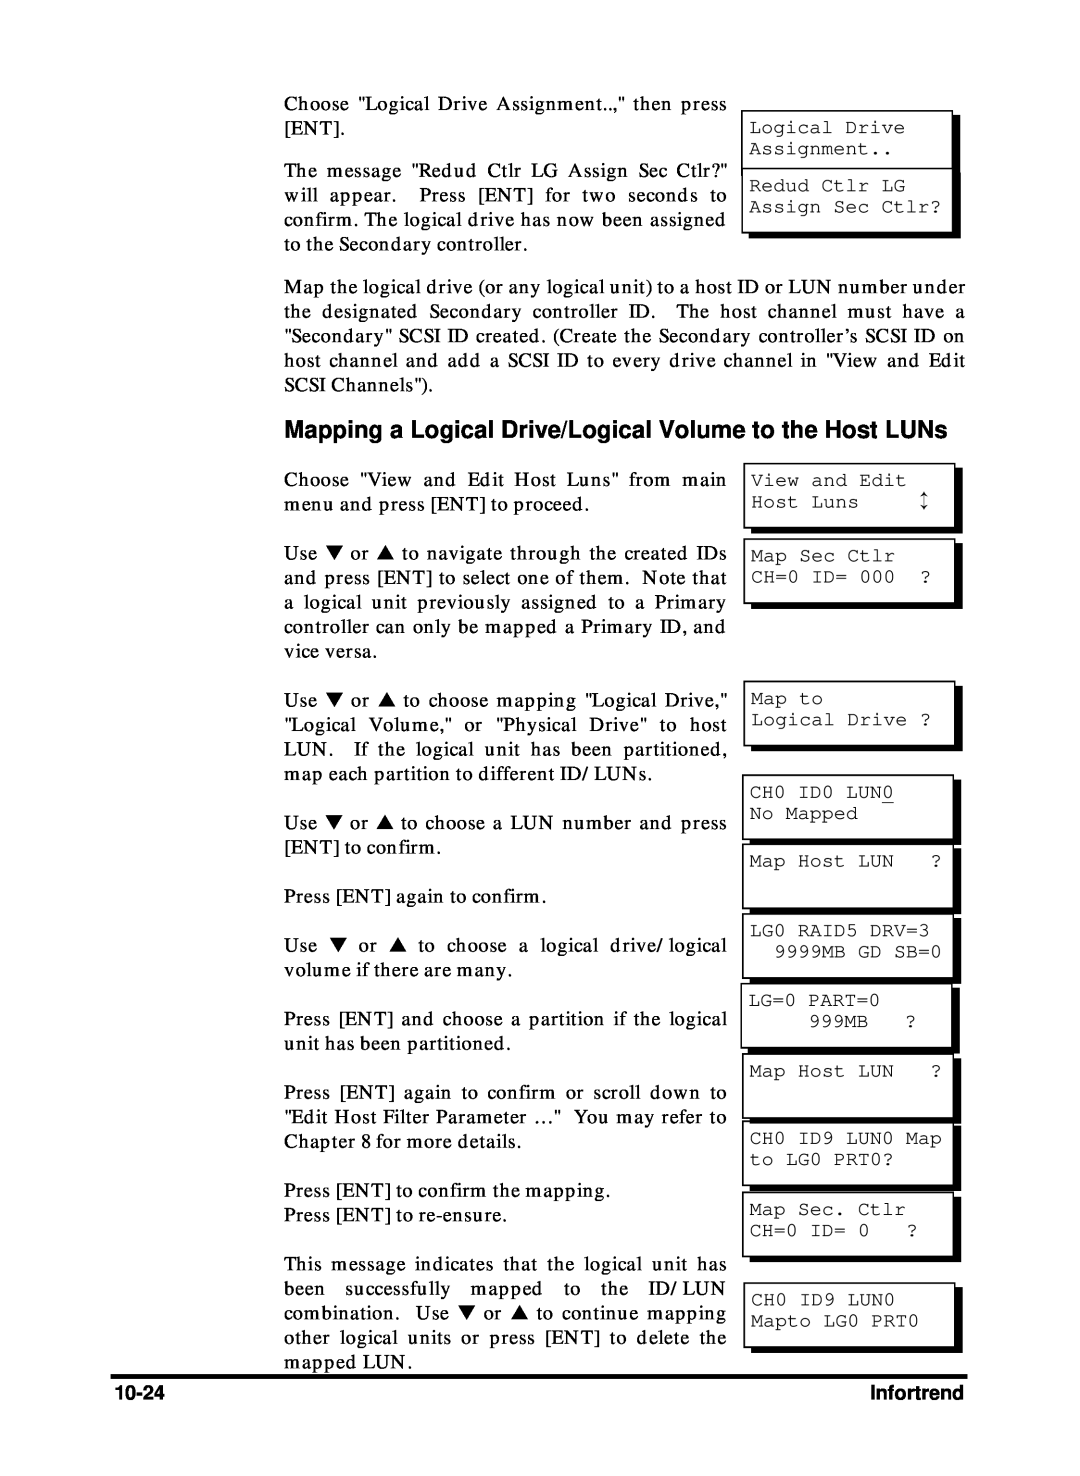 Compaq Infortrend manual Mapping a Logical Drive/Logical Volume to the Host LUNs 